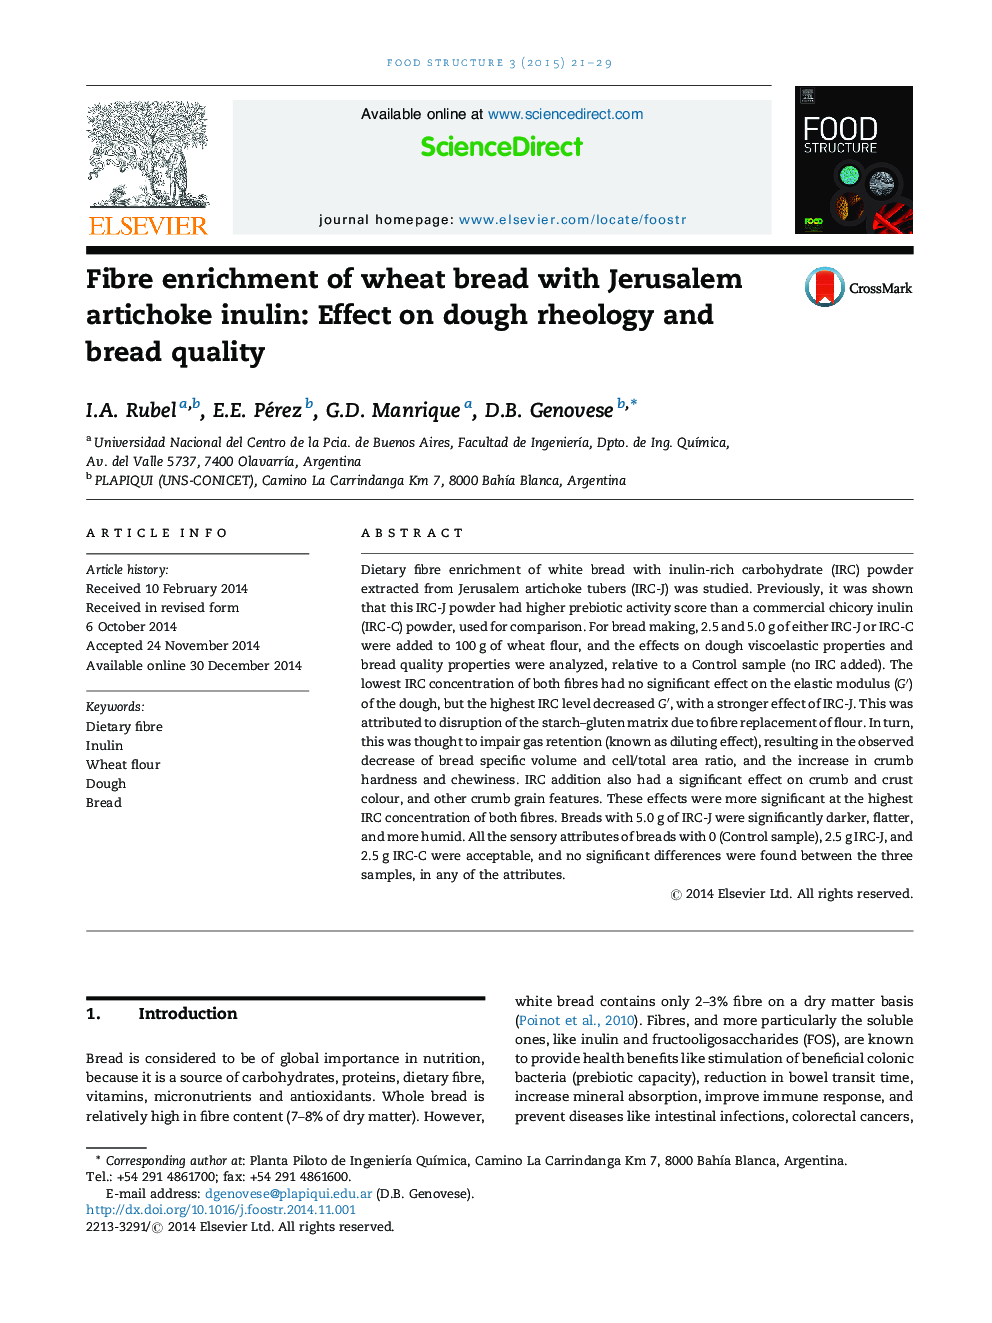 Fibre enrichment of wheat bread with Jerusalem artichoke inulin: Effect on dough rheology and bread quality